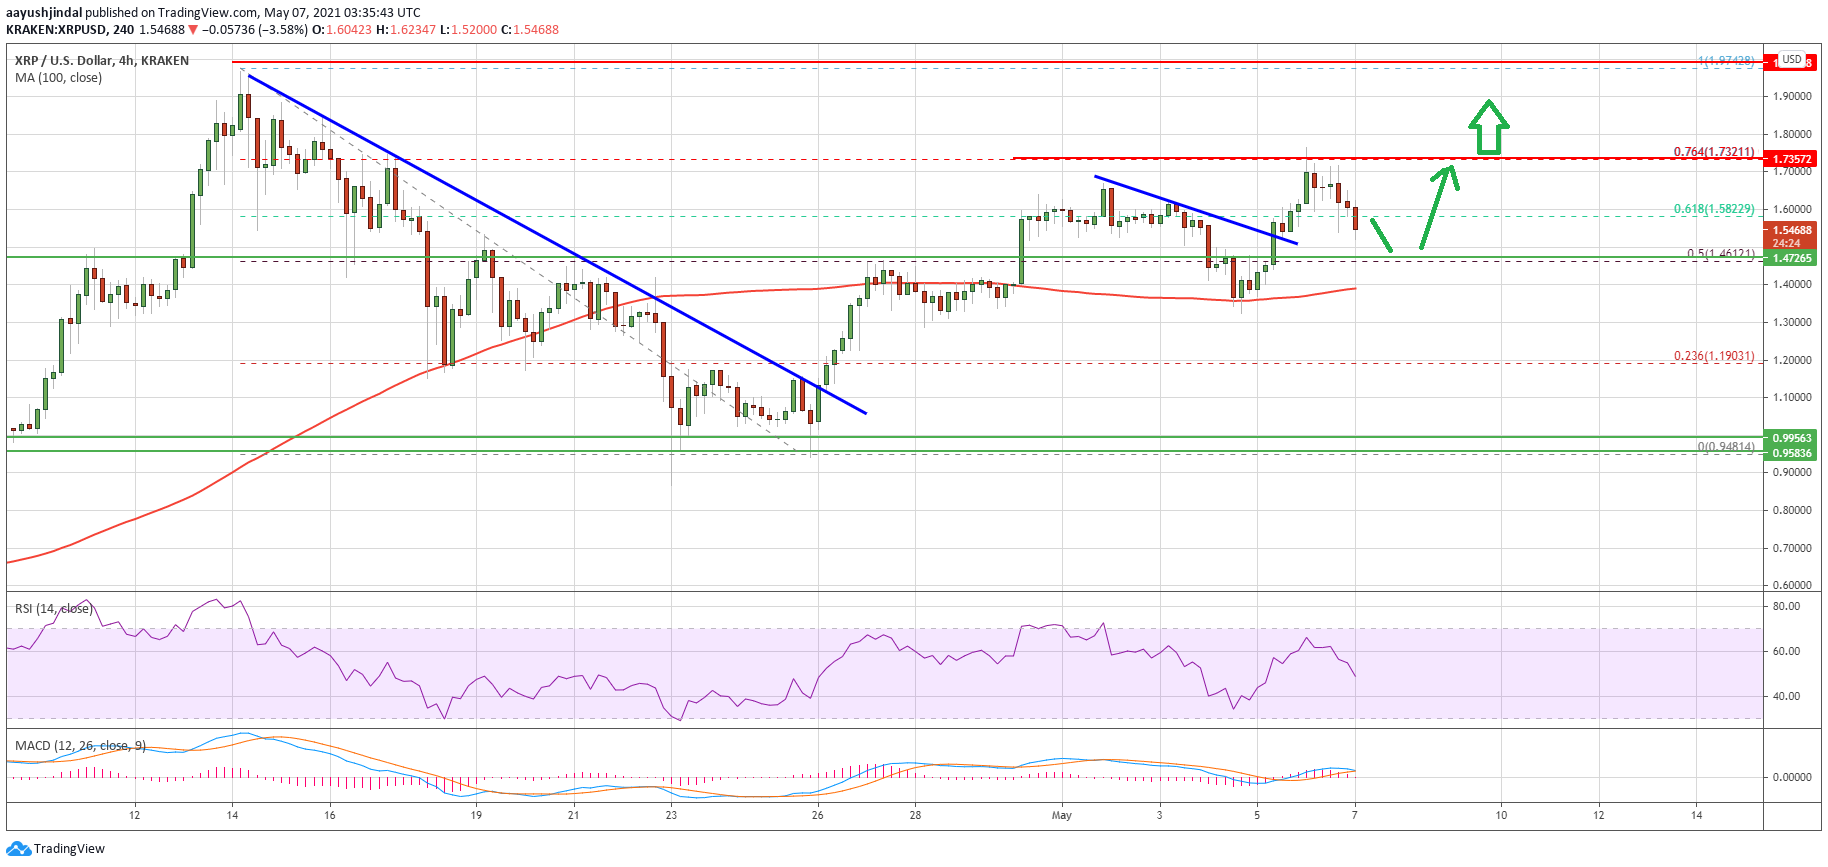 Charted: Ripple (XRP) Turns Green, Here’s Why The Bulls Could Aim $2